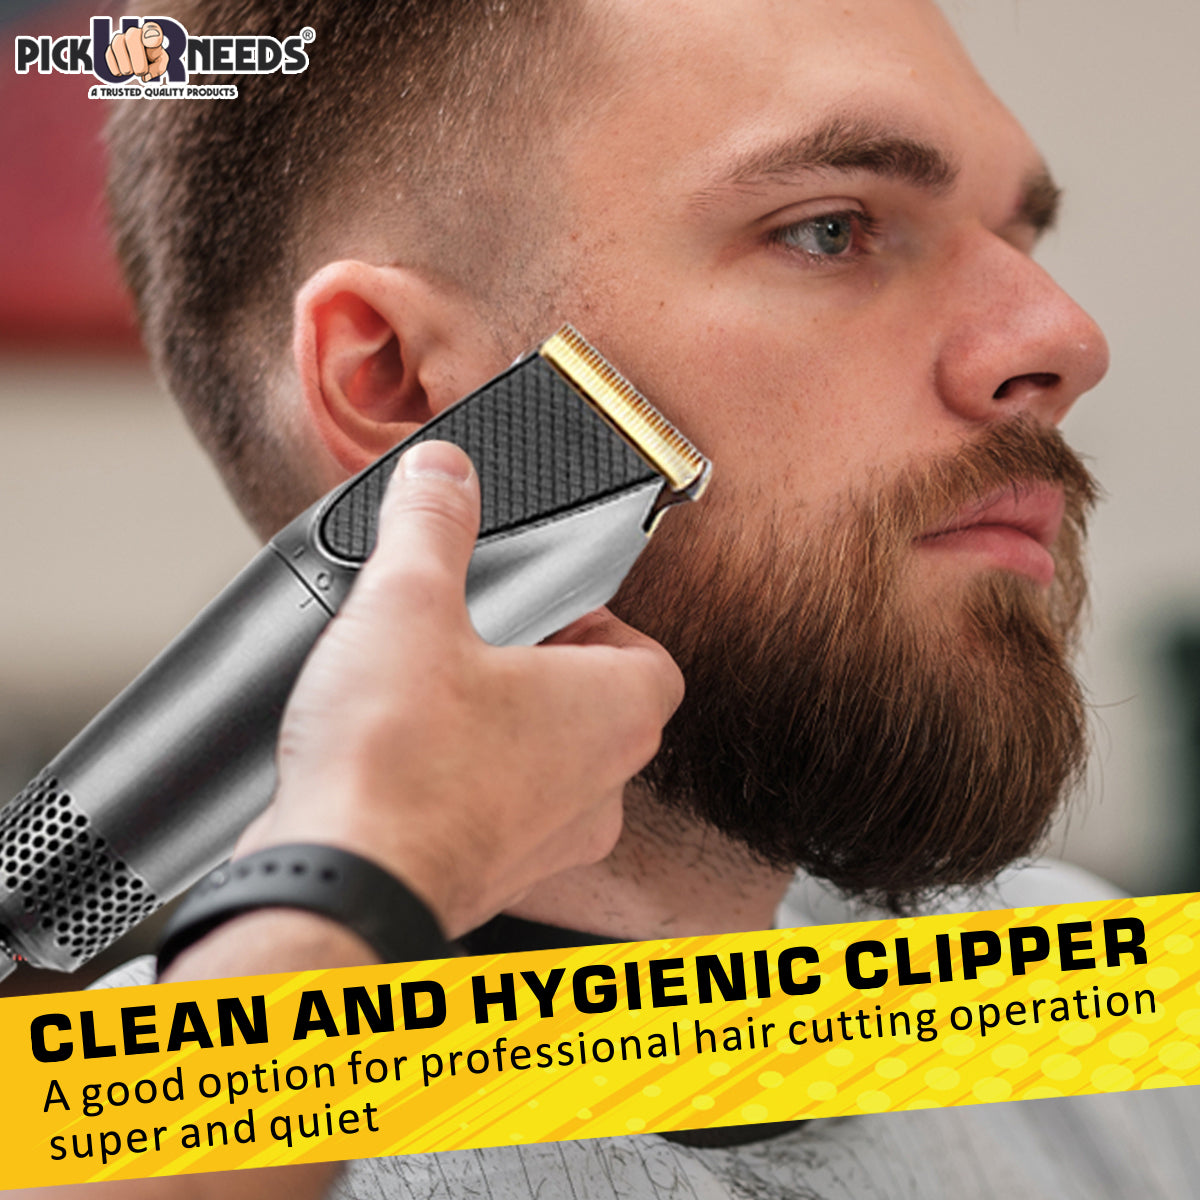 Pick Ur Needs Professional High Quality Hair Clipper Advanced Shaving System Runtime: 120 min Trimmer for Men